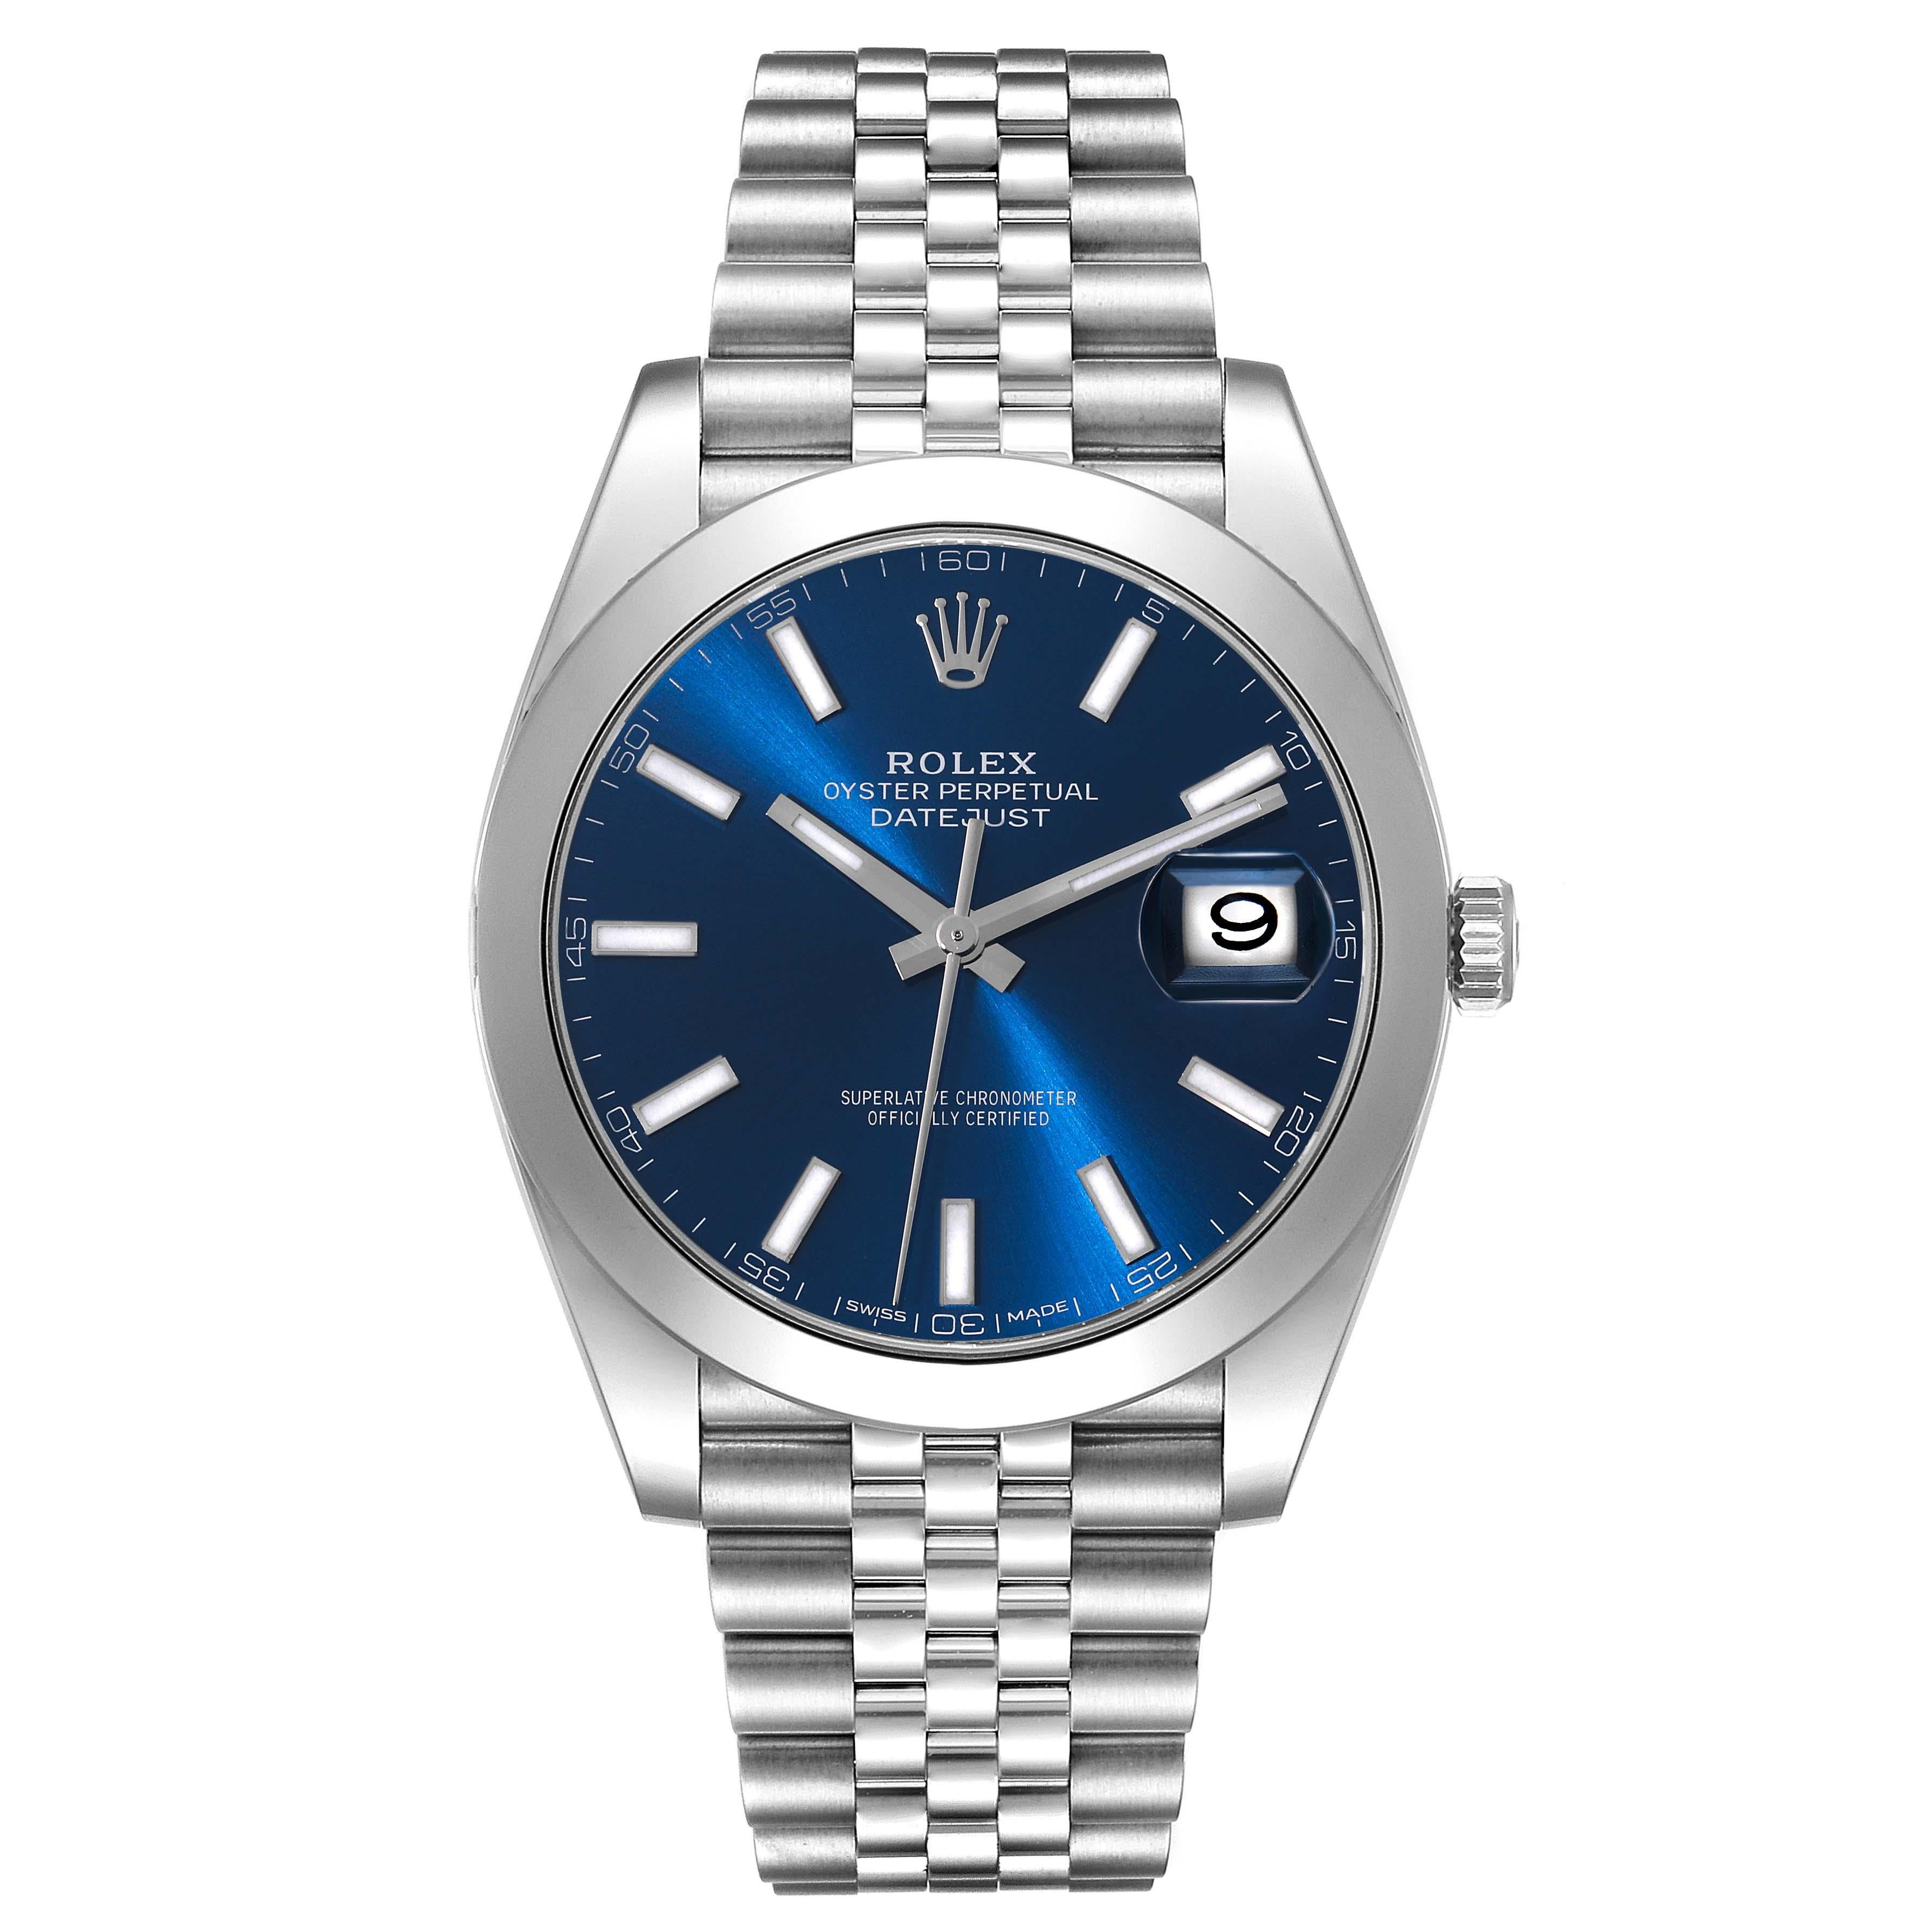 Rolex Datejust 41 Blue Dial Smooth Bezel Steel Mens Watch 126300. Officially certified chronometer automatic self-winding movement. Stainless steel case 41 mm in diameter. Rolex logo on the crown. Stainless steel smooth bezel. Scratch resistant